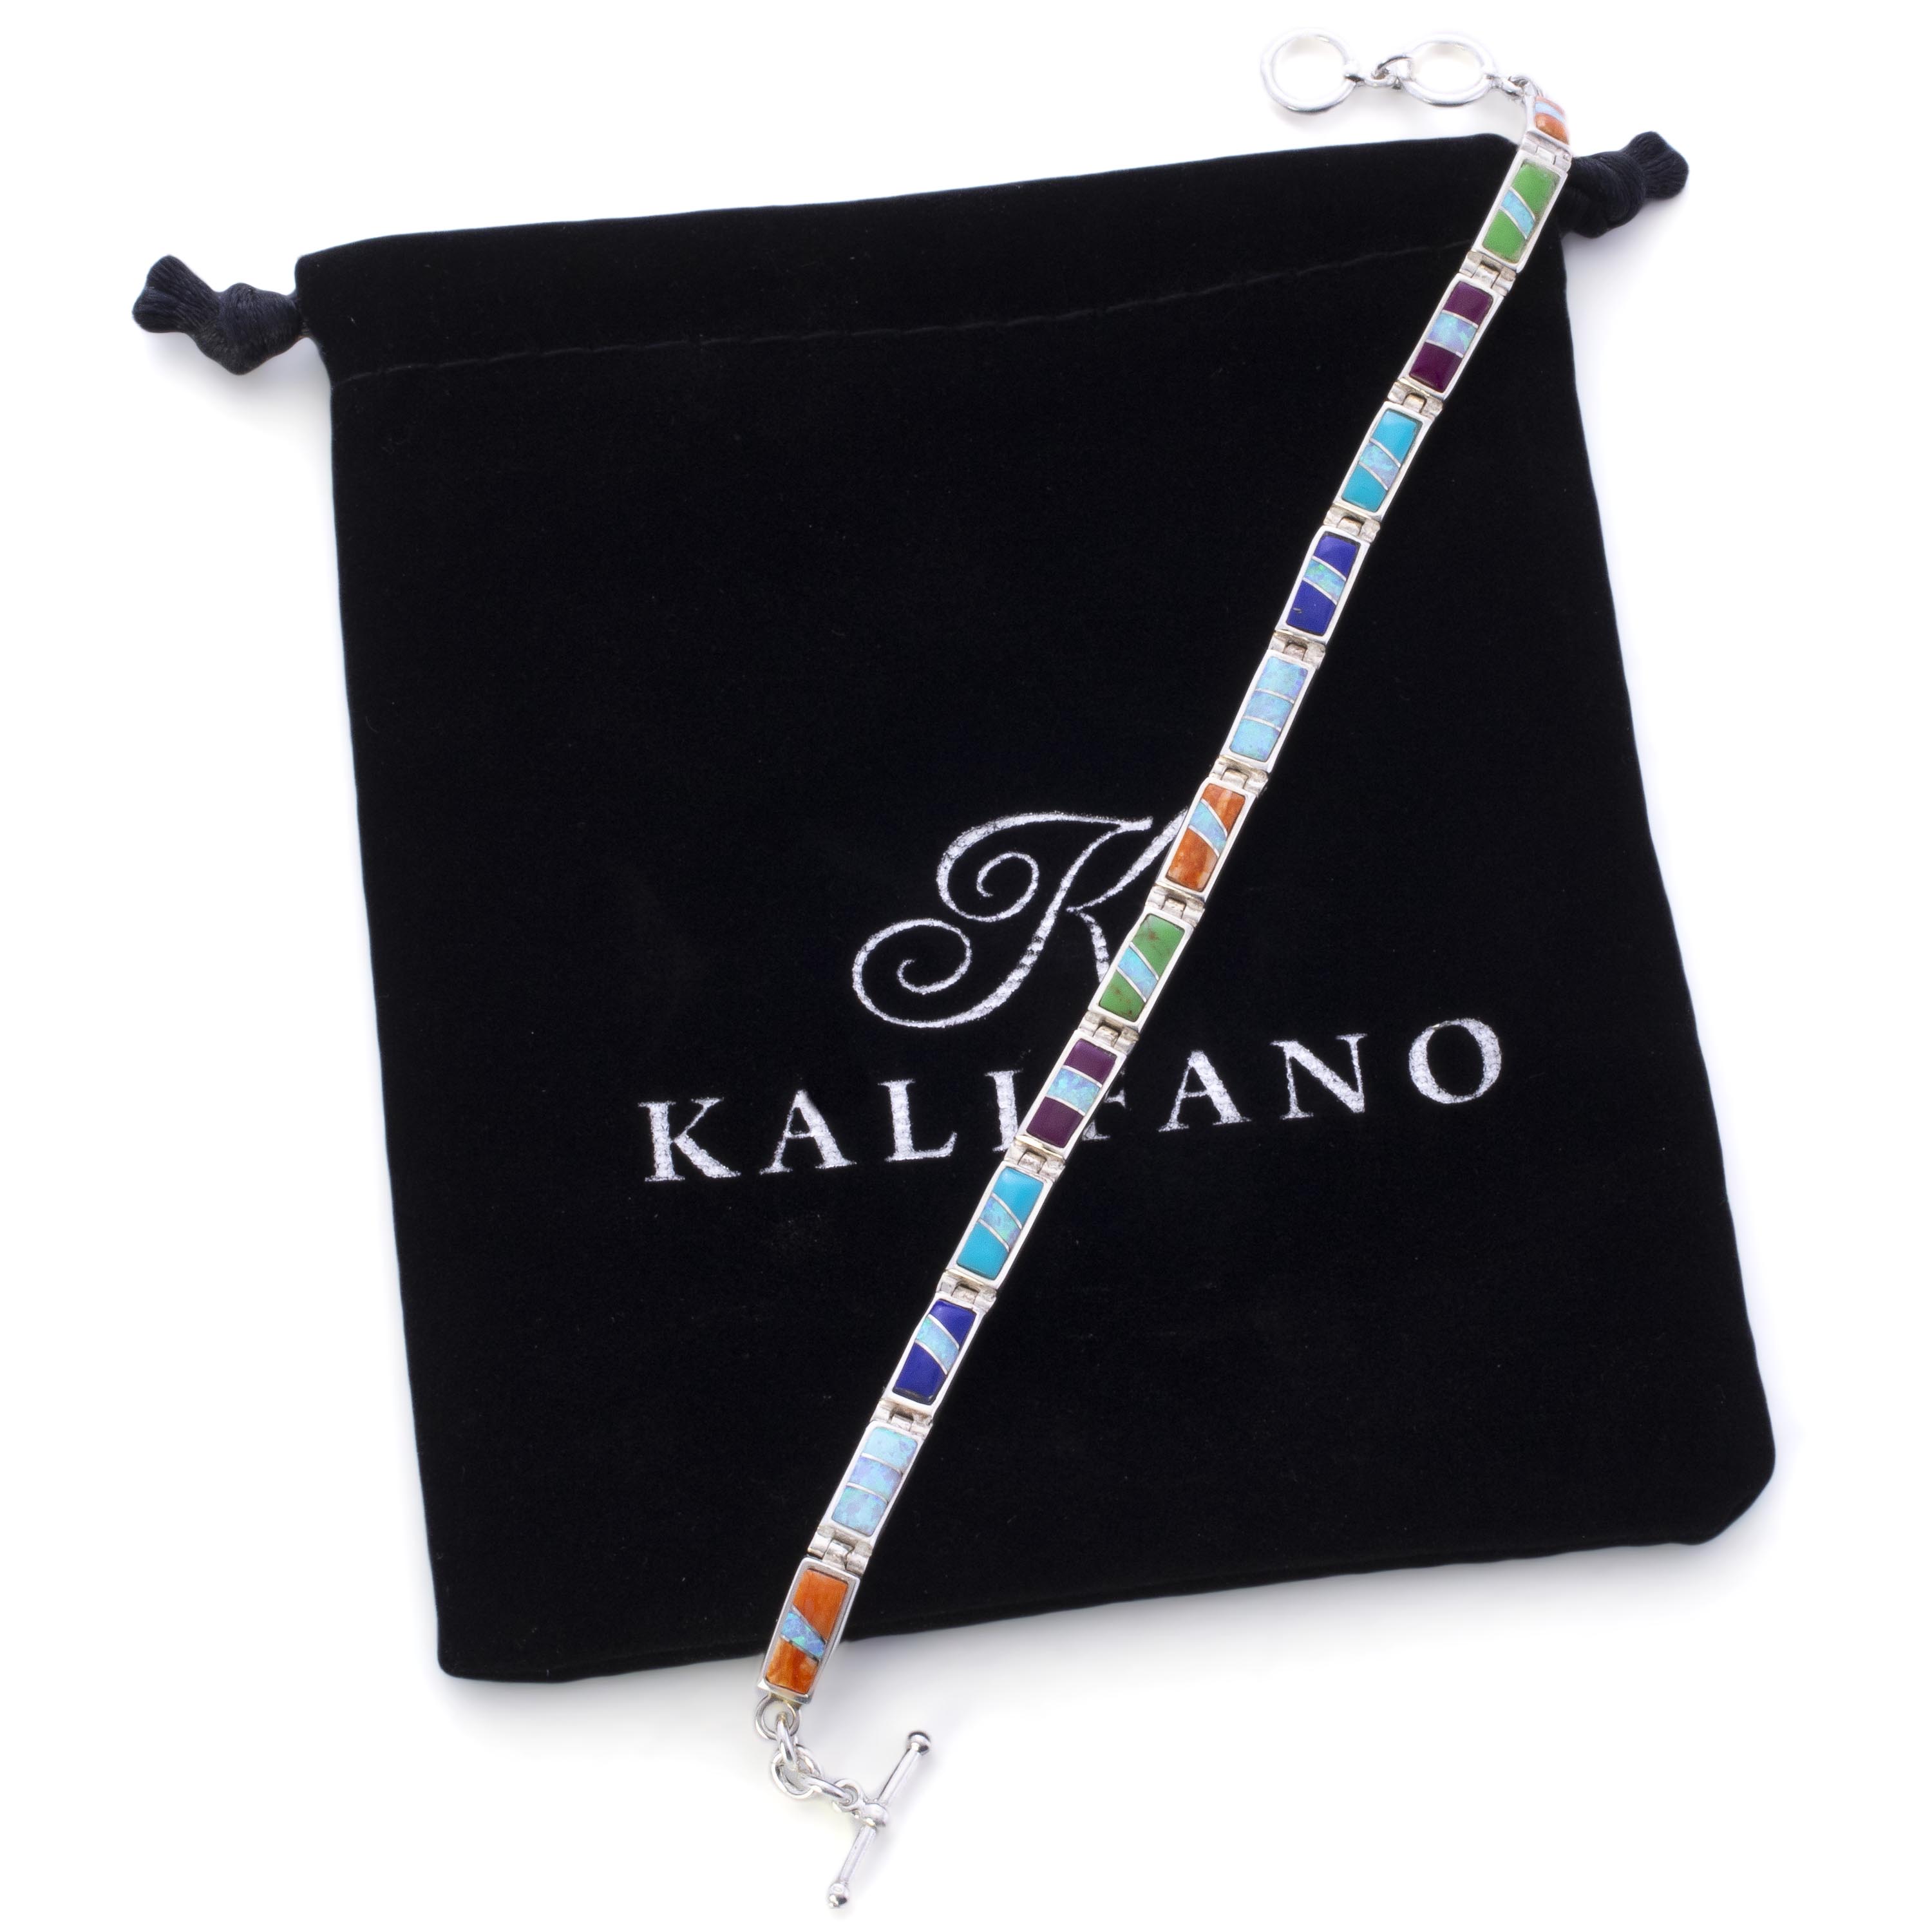 Kalifano Southwest Silver Jewelry Multi Gemstone 925 Sterling Silver Bracelet USA Handmade with Opal Accent NMB.0224.MT